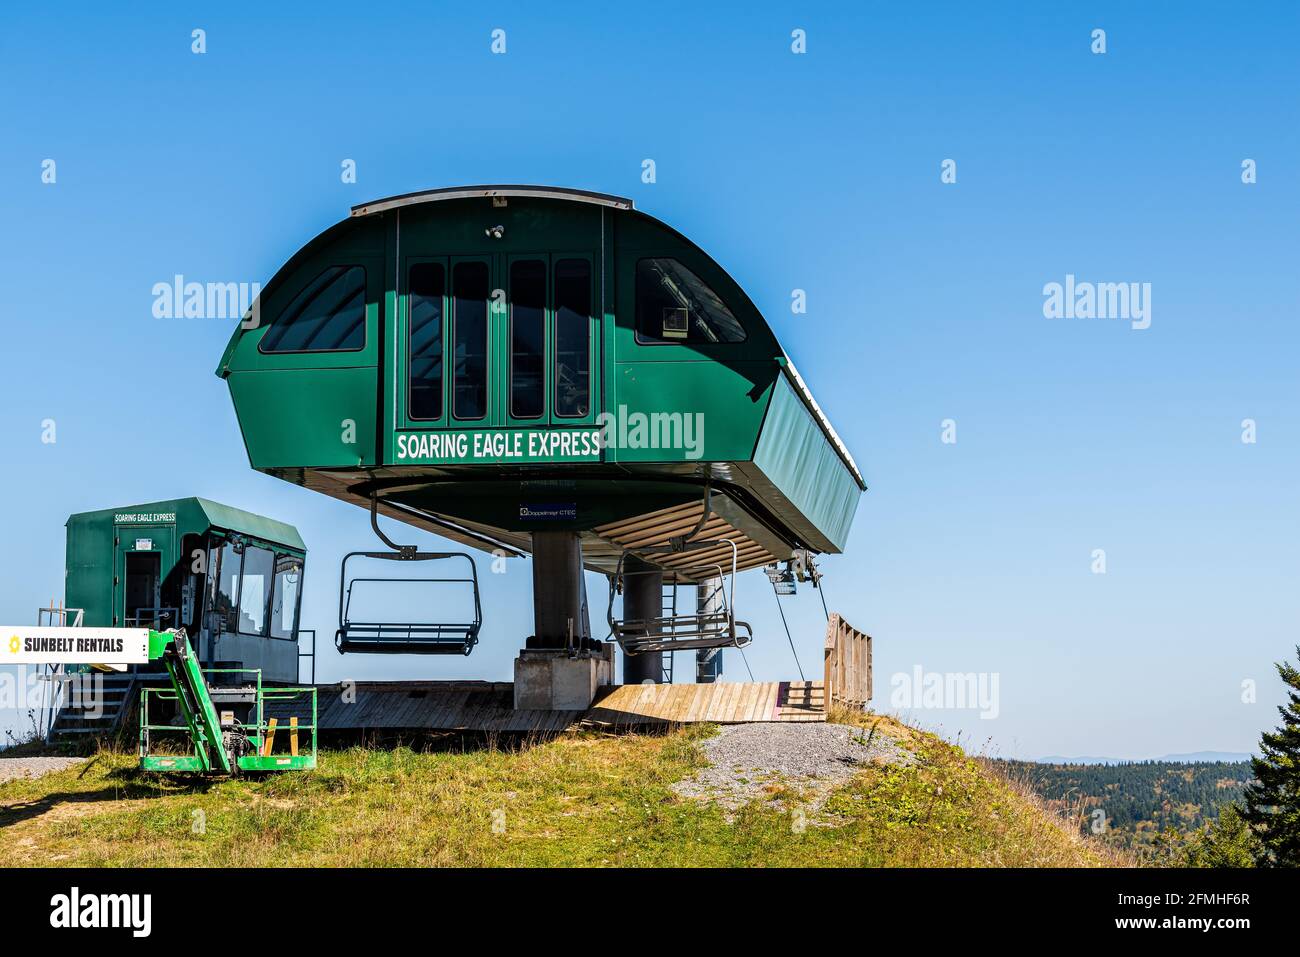 Snowshoe, USA - October 6, 2020: Soaring Eagle Express ski lift funicular sign by rental equipment from Sunbelt Rentals in ski resort town village of Stock Photo